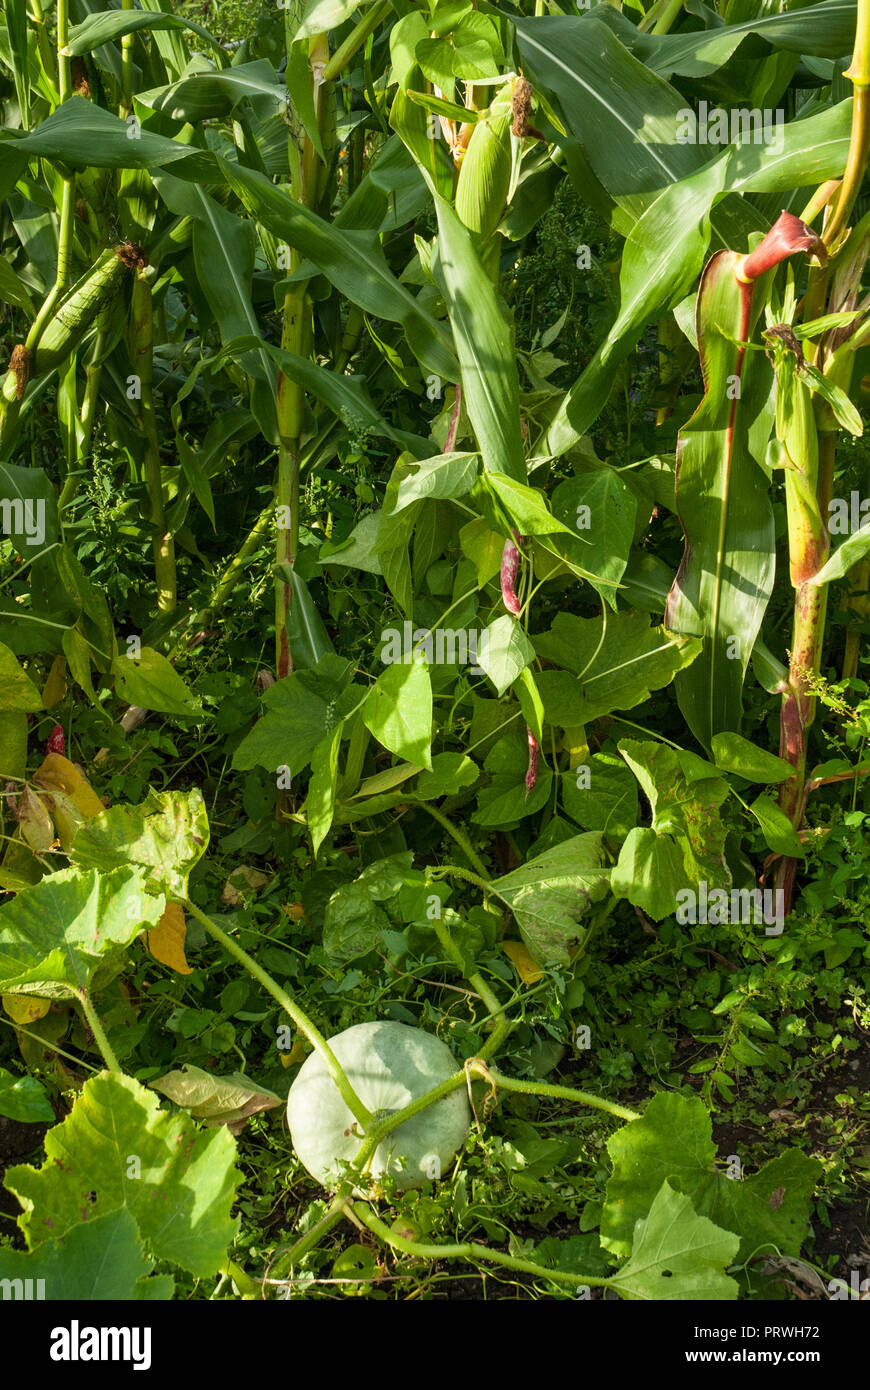 Three sisters method of growing with beans planted to grow up sweet corn/ maize and pumpkins growing underneath. Instructional-three sisters method. Stock Photo